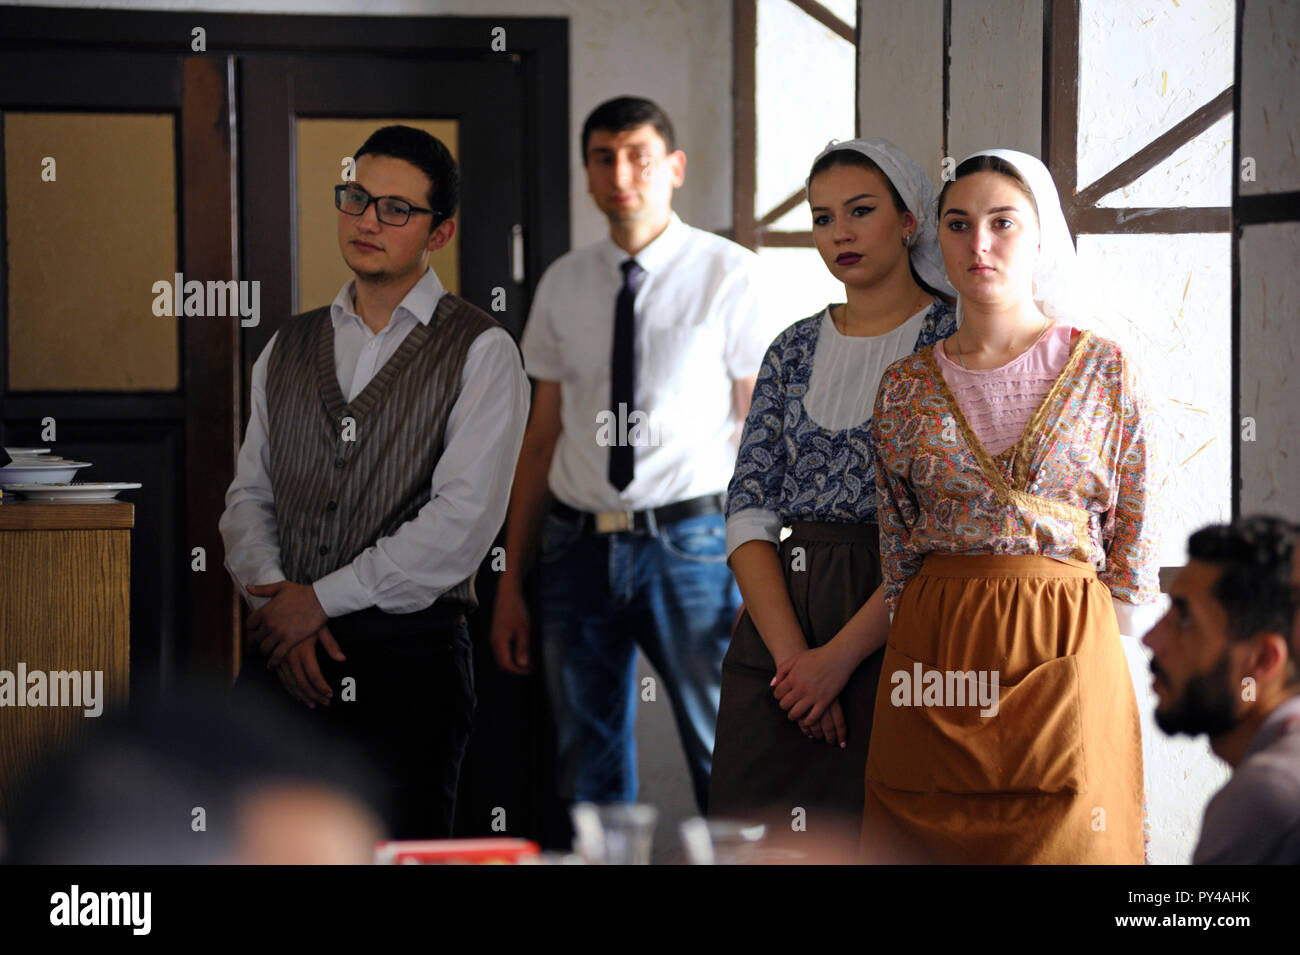 At the Tatar restaurant: waitresses and waiter in Tatar native dress standing by counter while people eating at tables. September 8,2018. Kiev,Ukraine Stock Photo